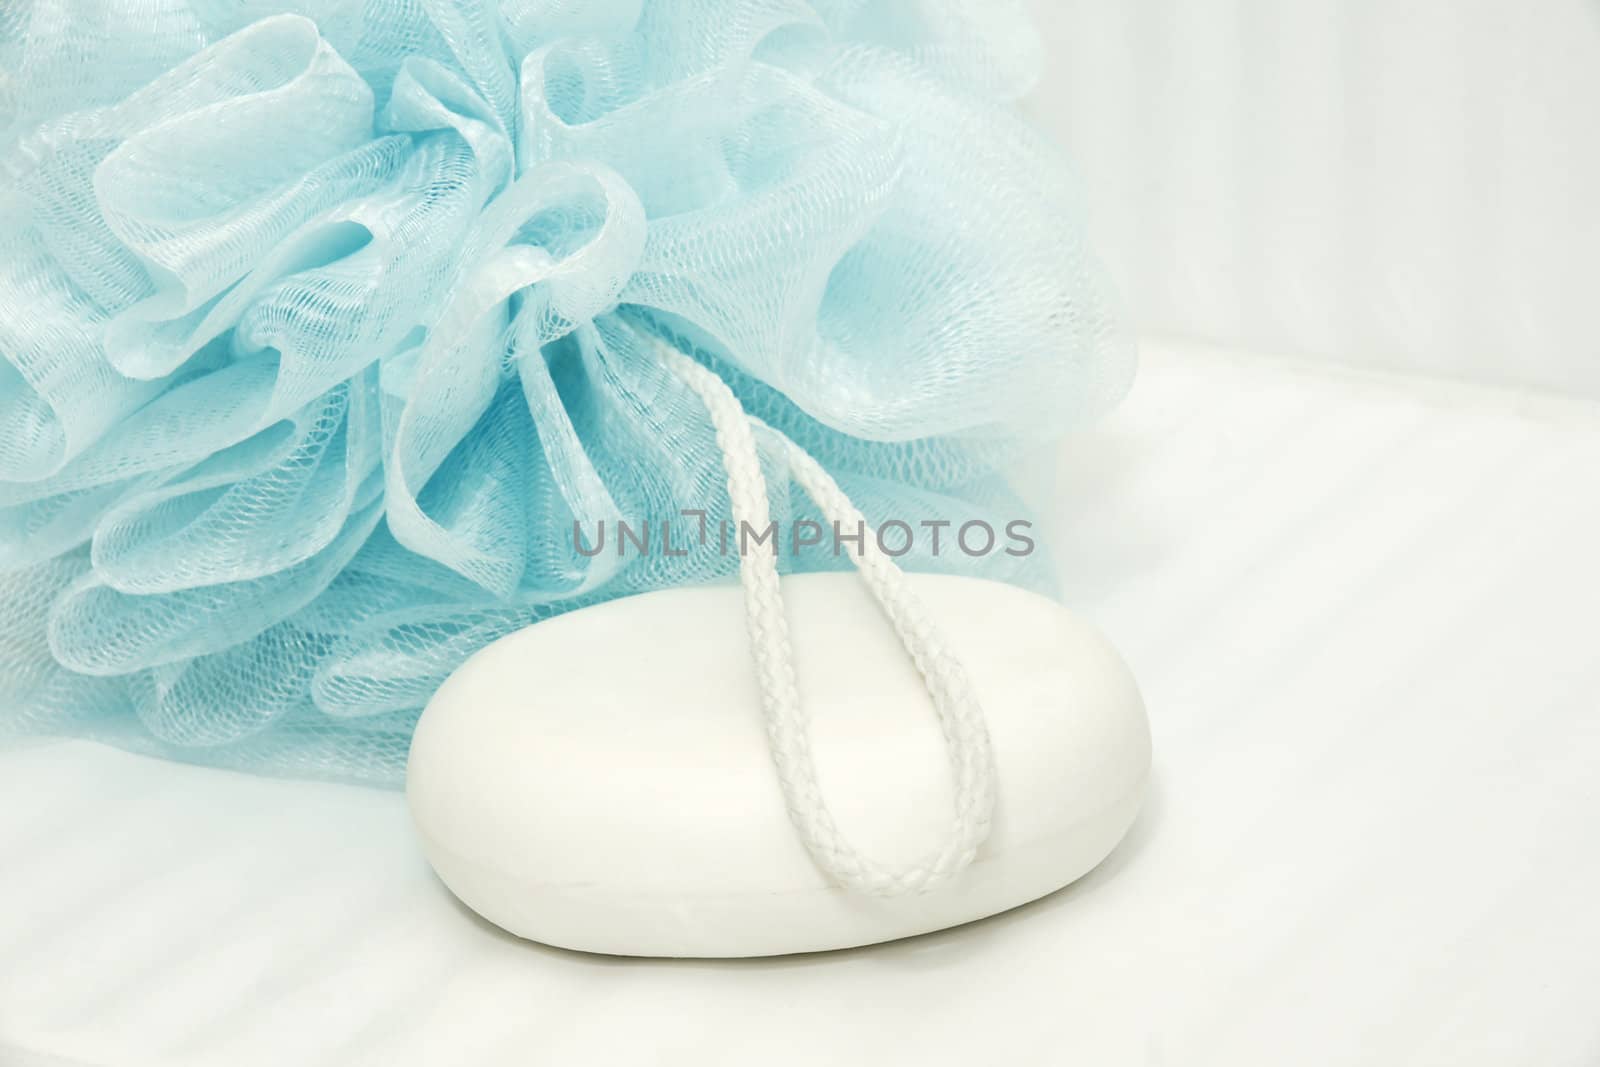 Blue shower puff and soap on tiles by Mirage3